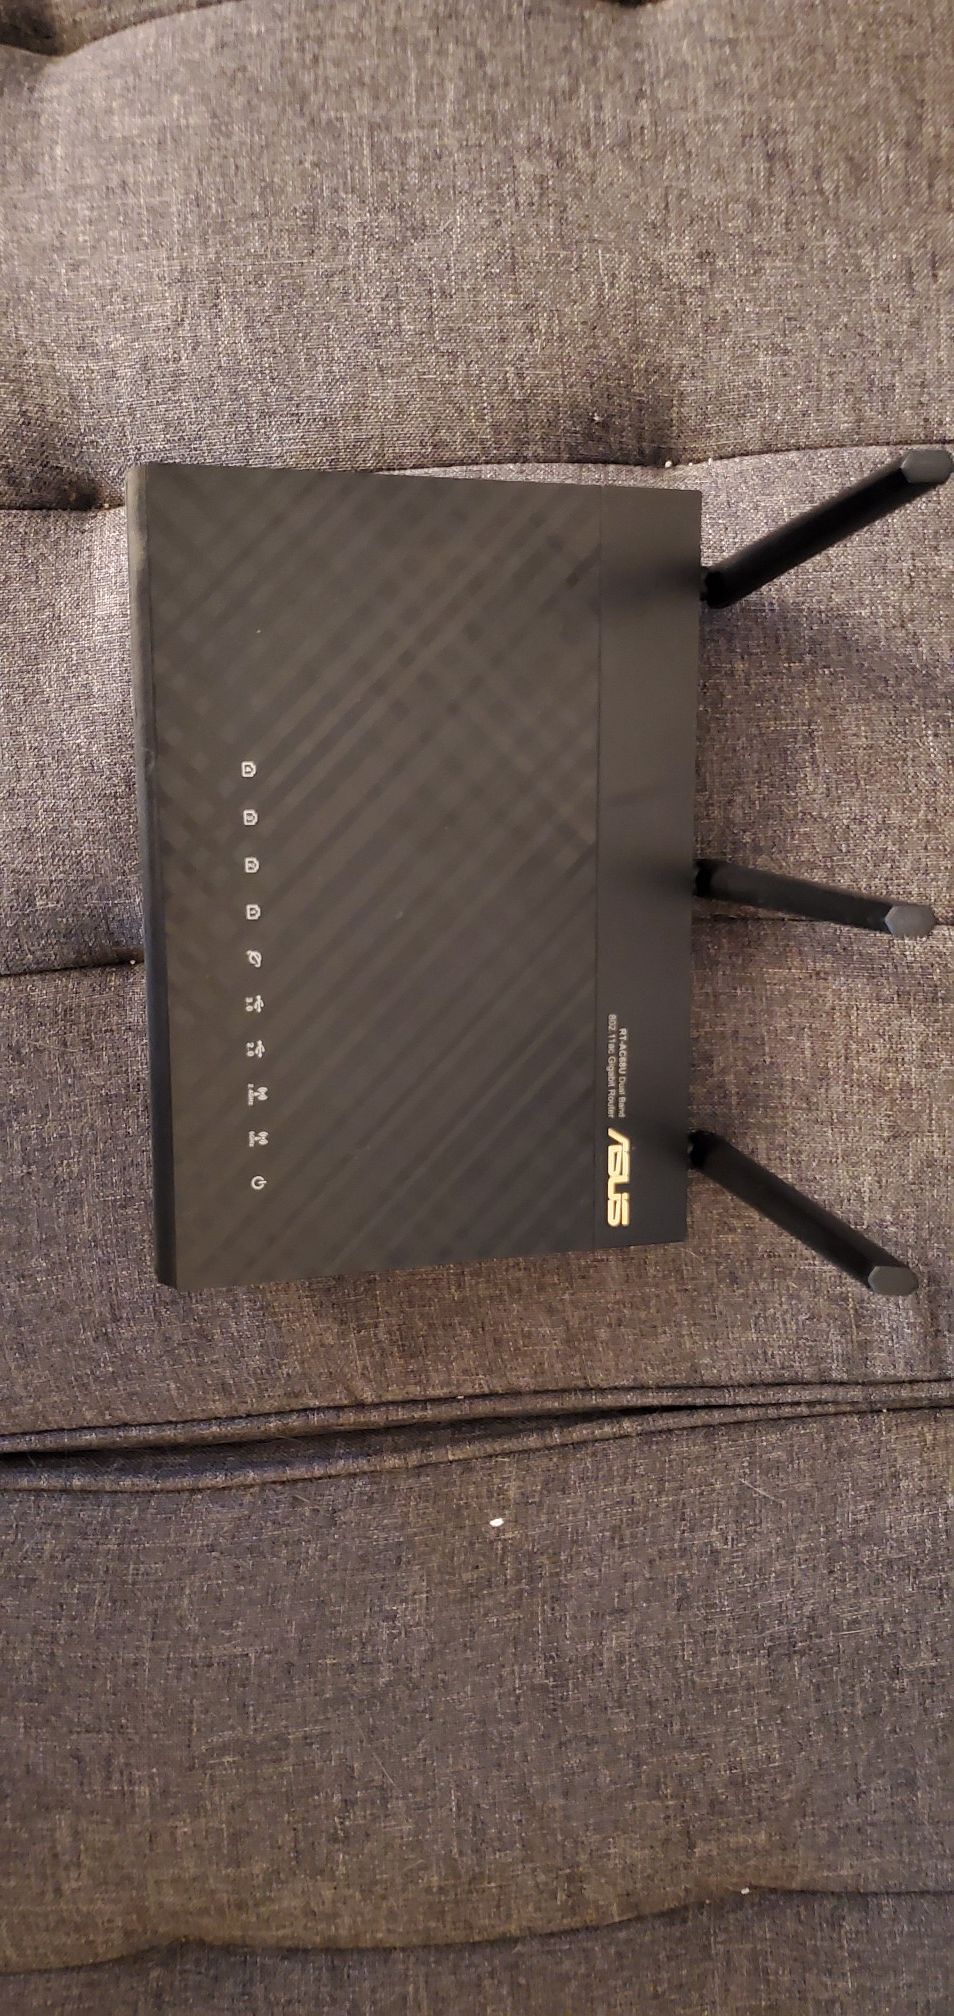 5GHz AC Wireless Router (ASUS RT-AC68U)